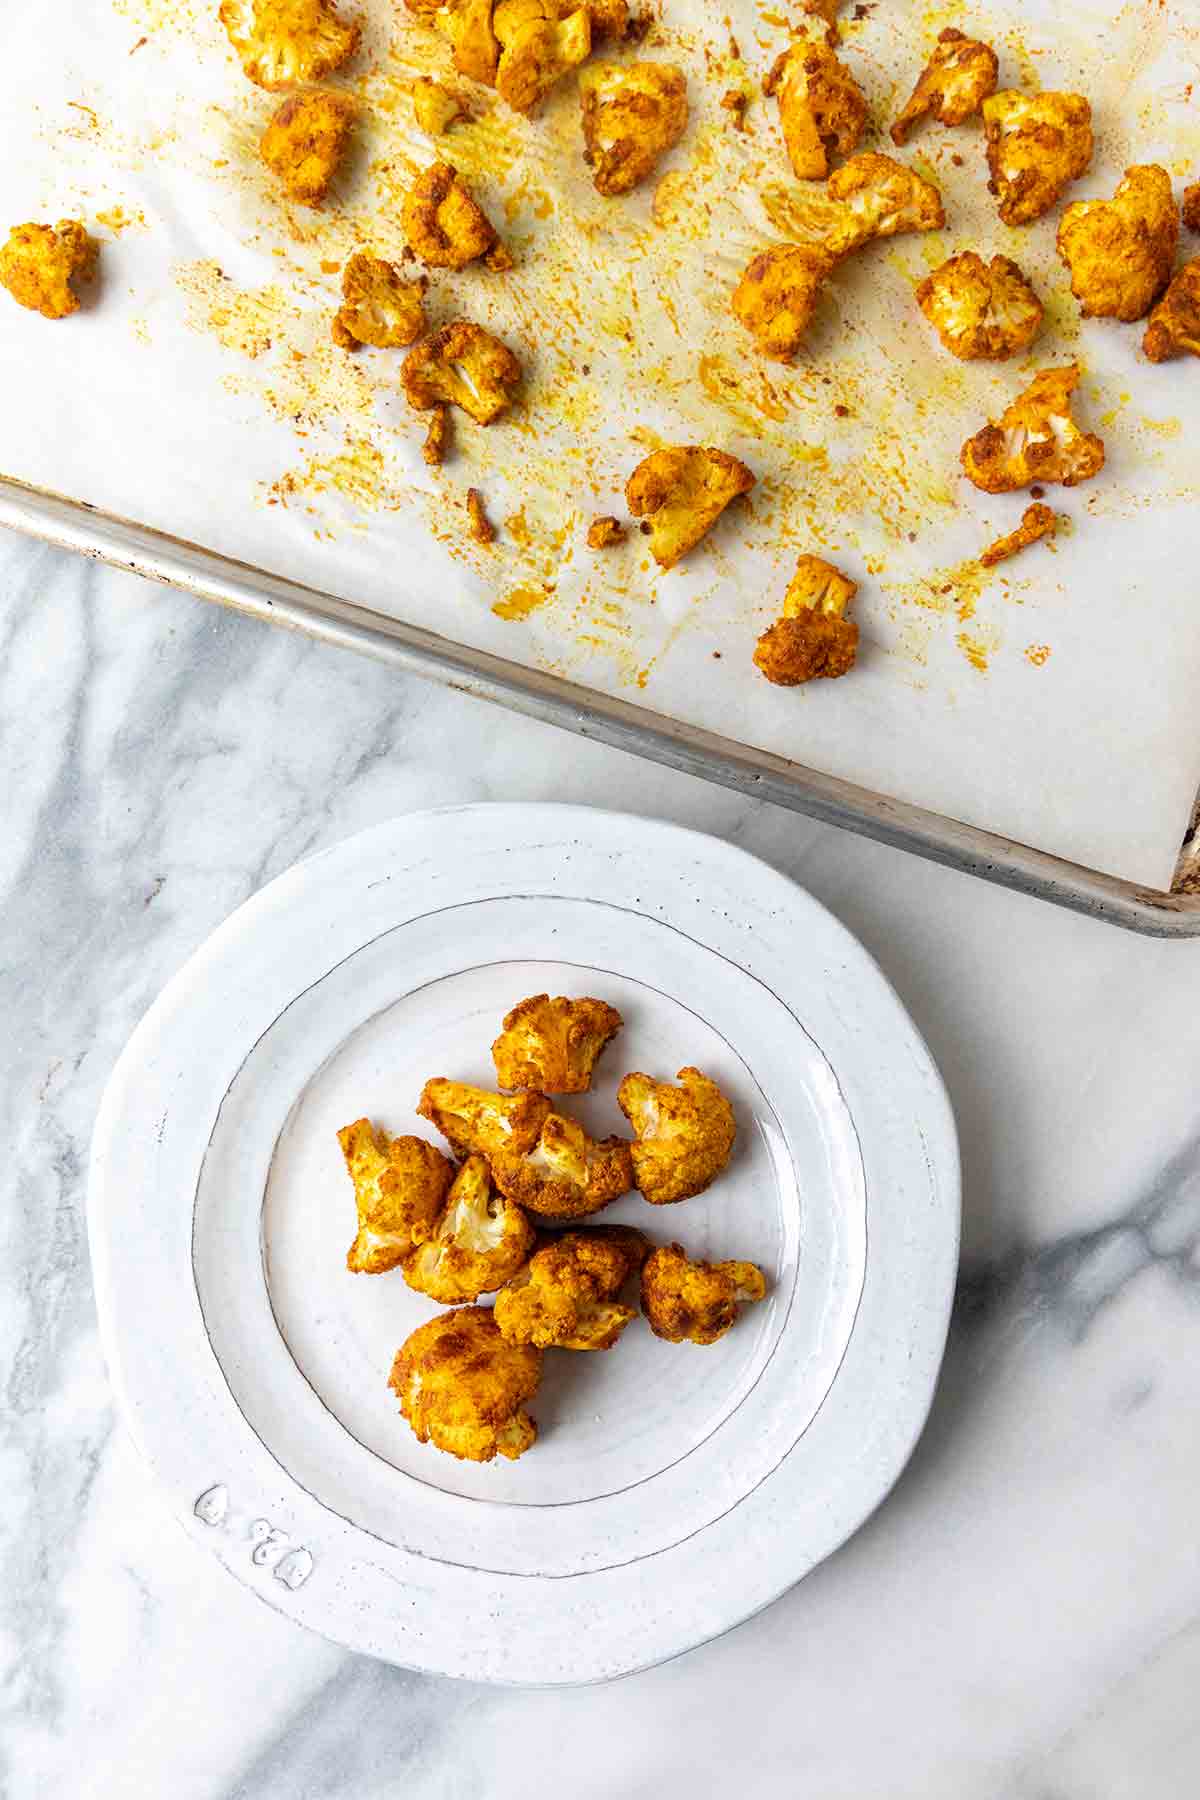 Florets of spicy roasted cauliflower on a white plate and on a baking sheet beside it.